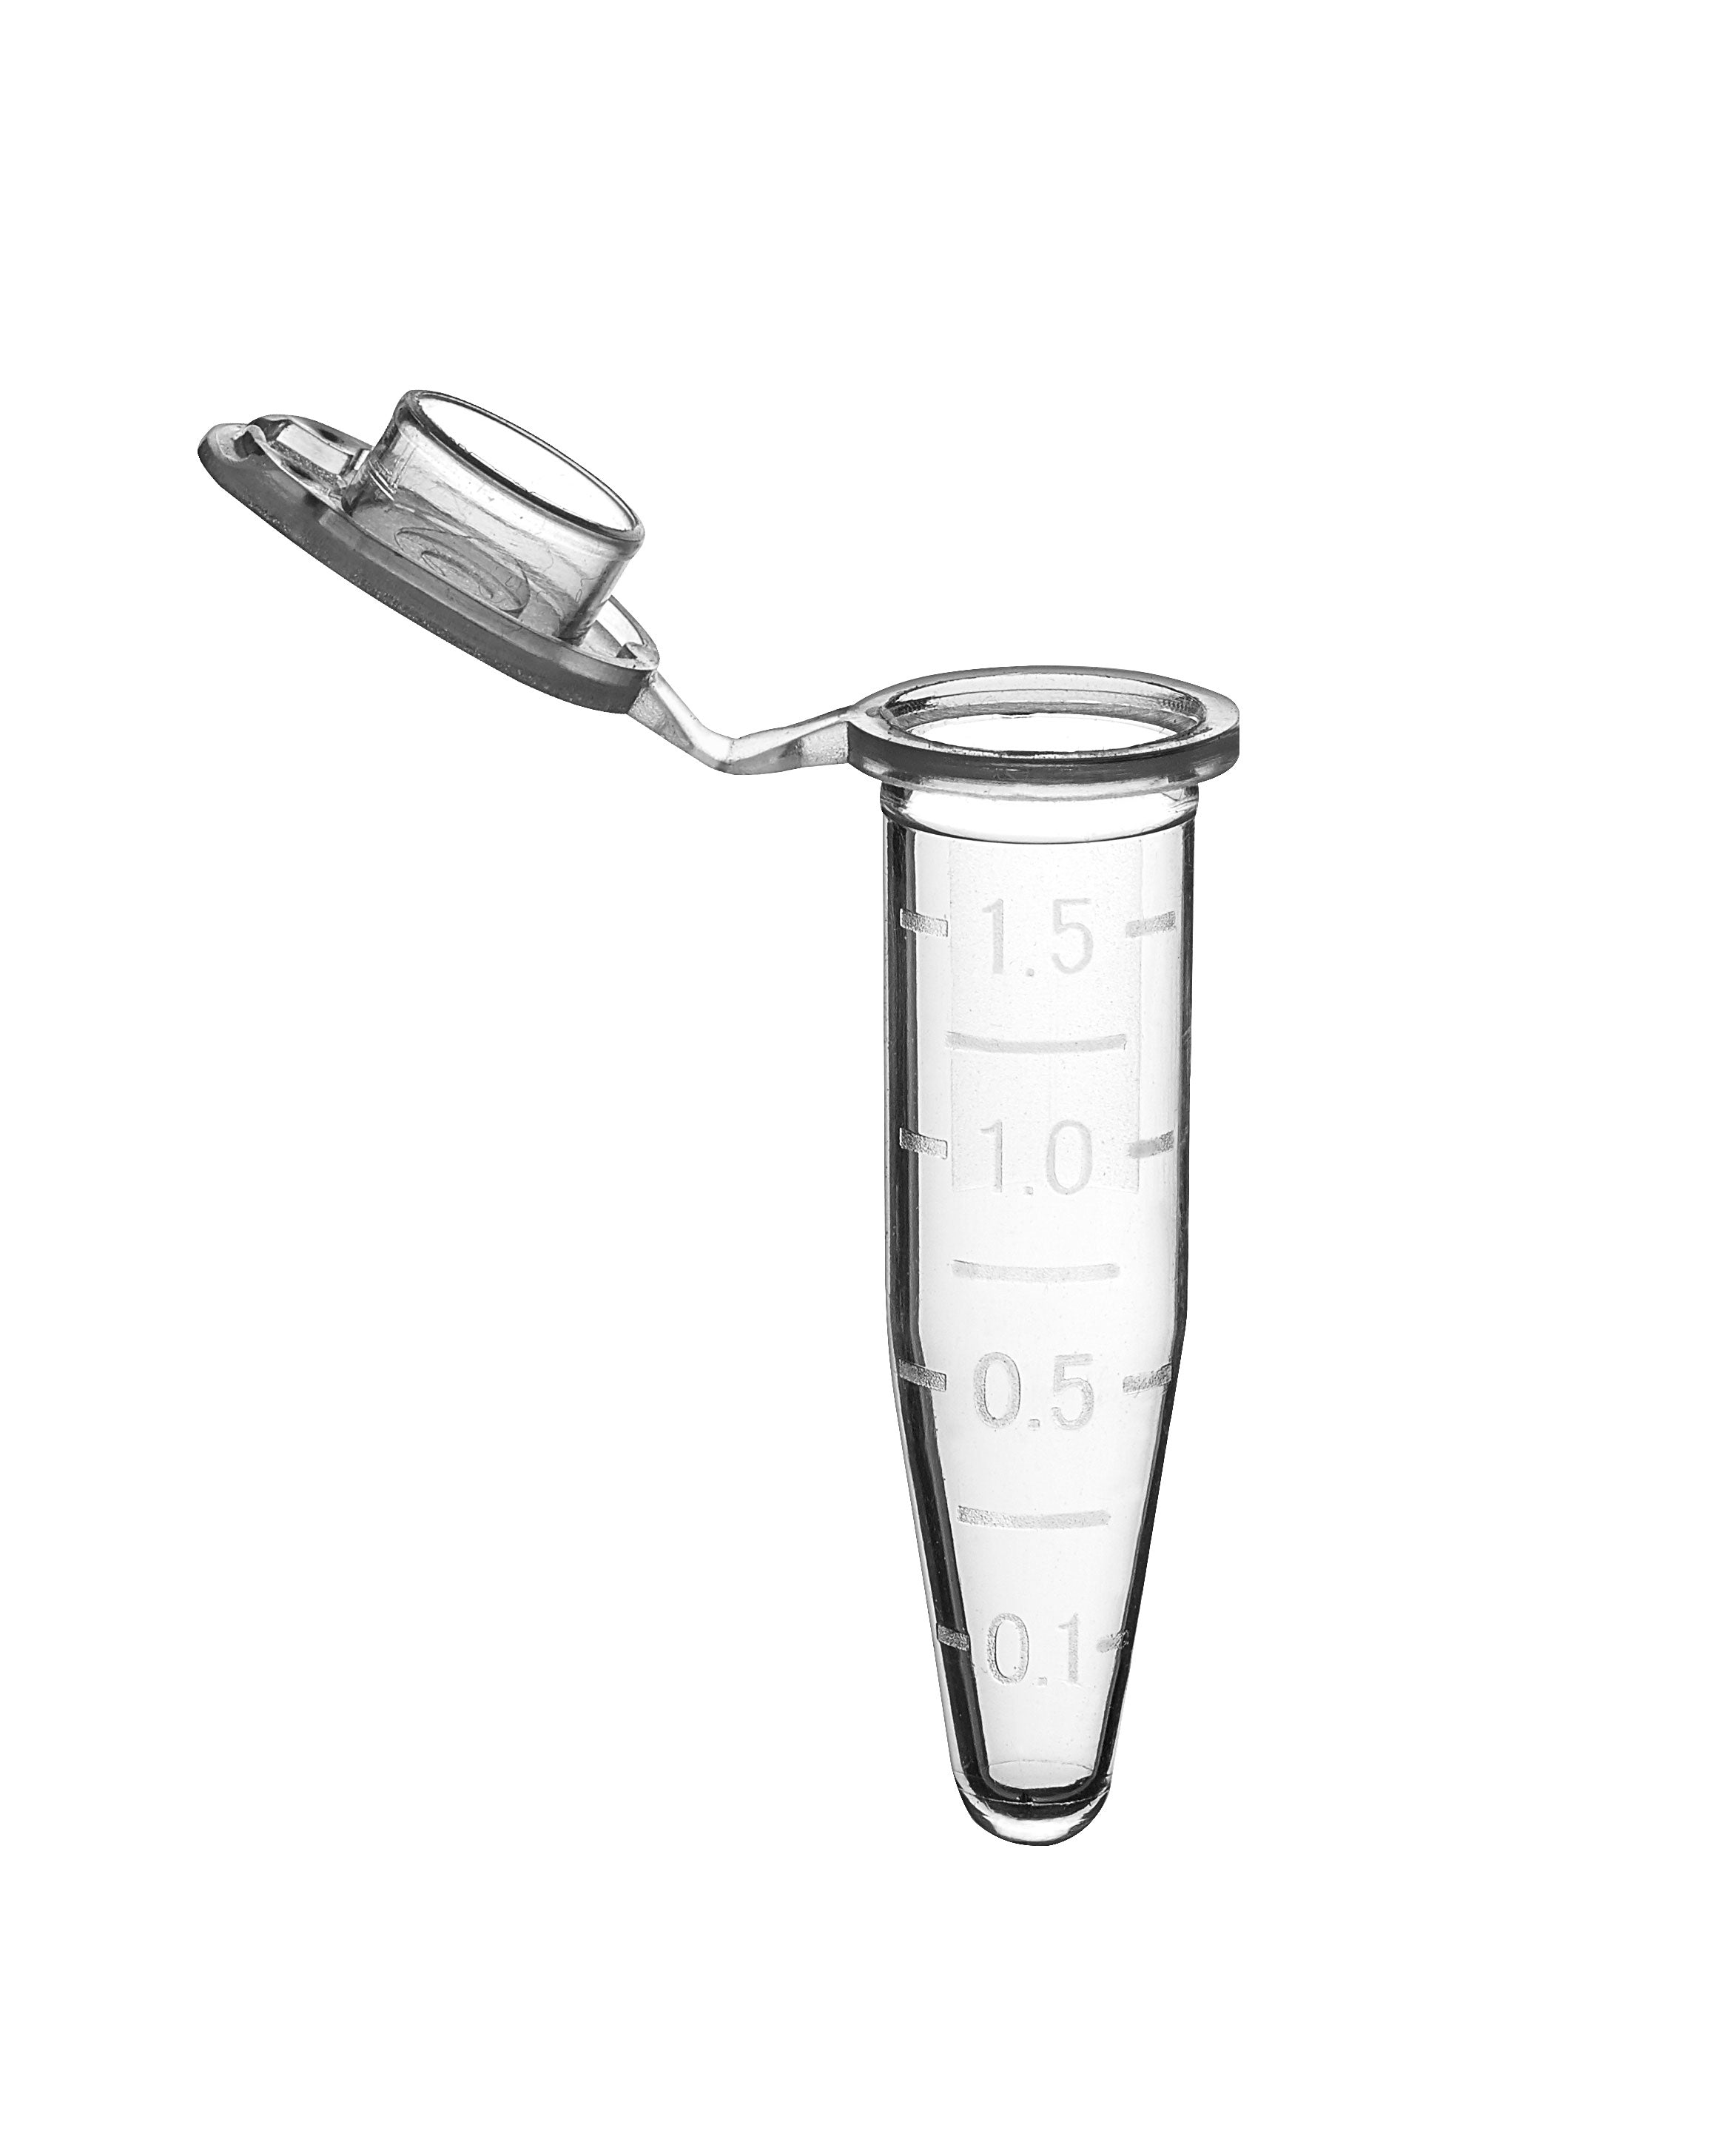 MTC Bio C2000-50, SureSeal Microcentrifuge Tube with Cap, 1.5ml, Clear, Sterile, with Self-Standing Bag, 10 packs of 50 Tubes, 500/pk